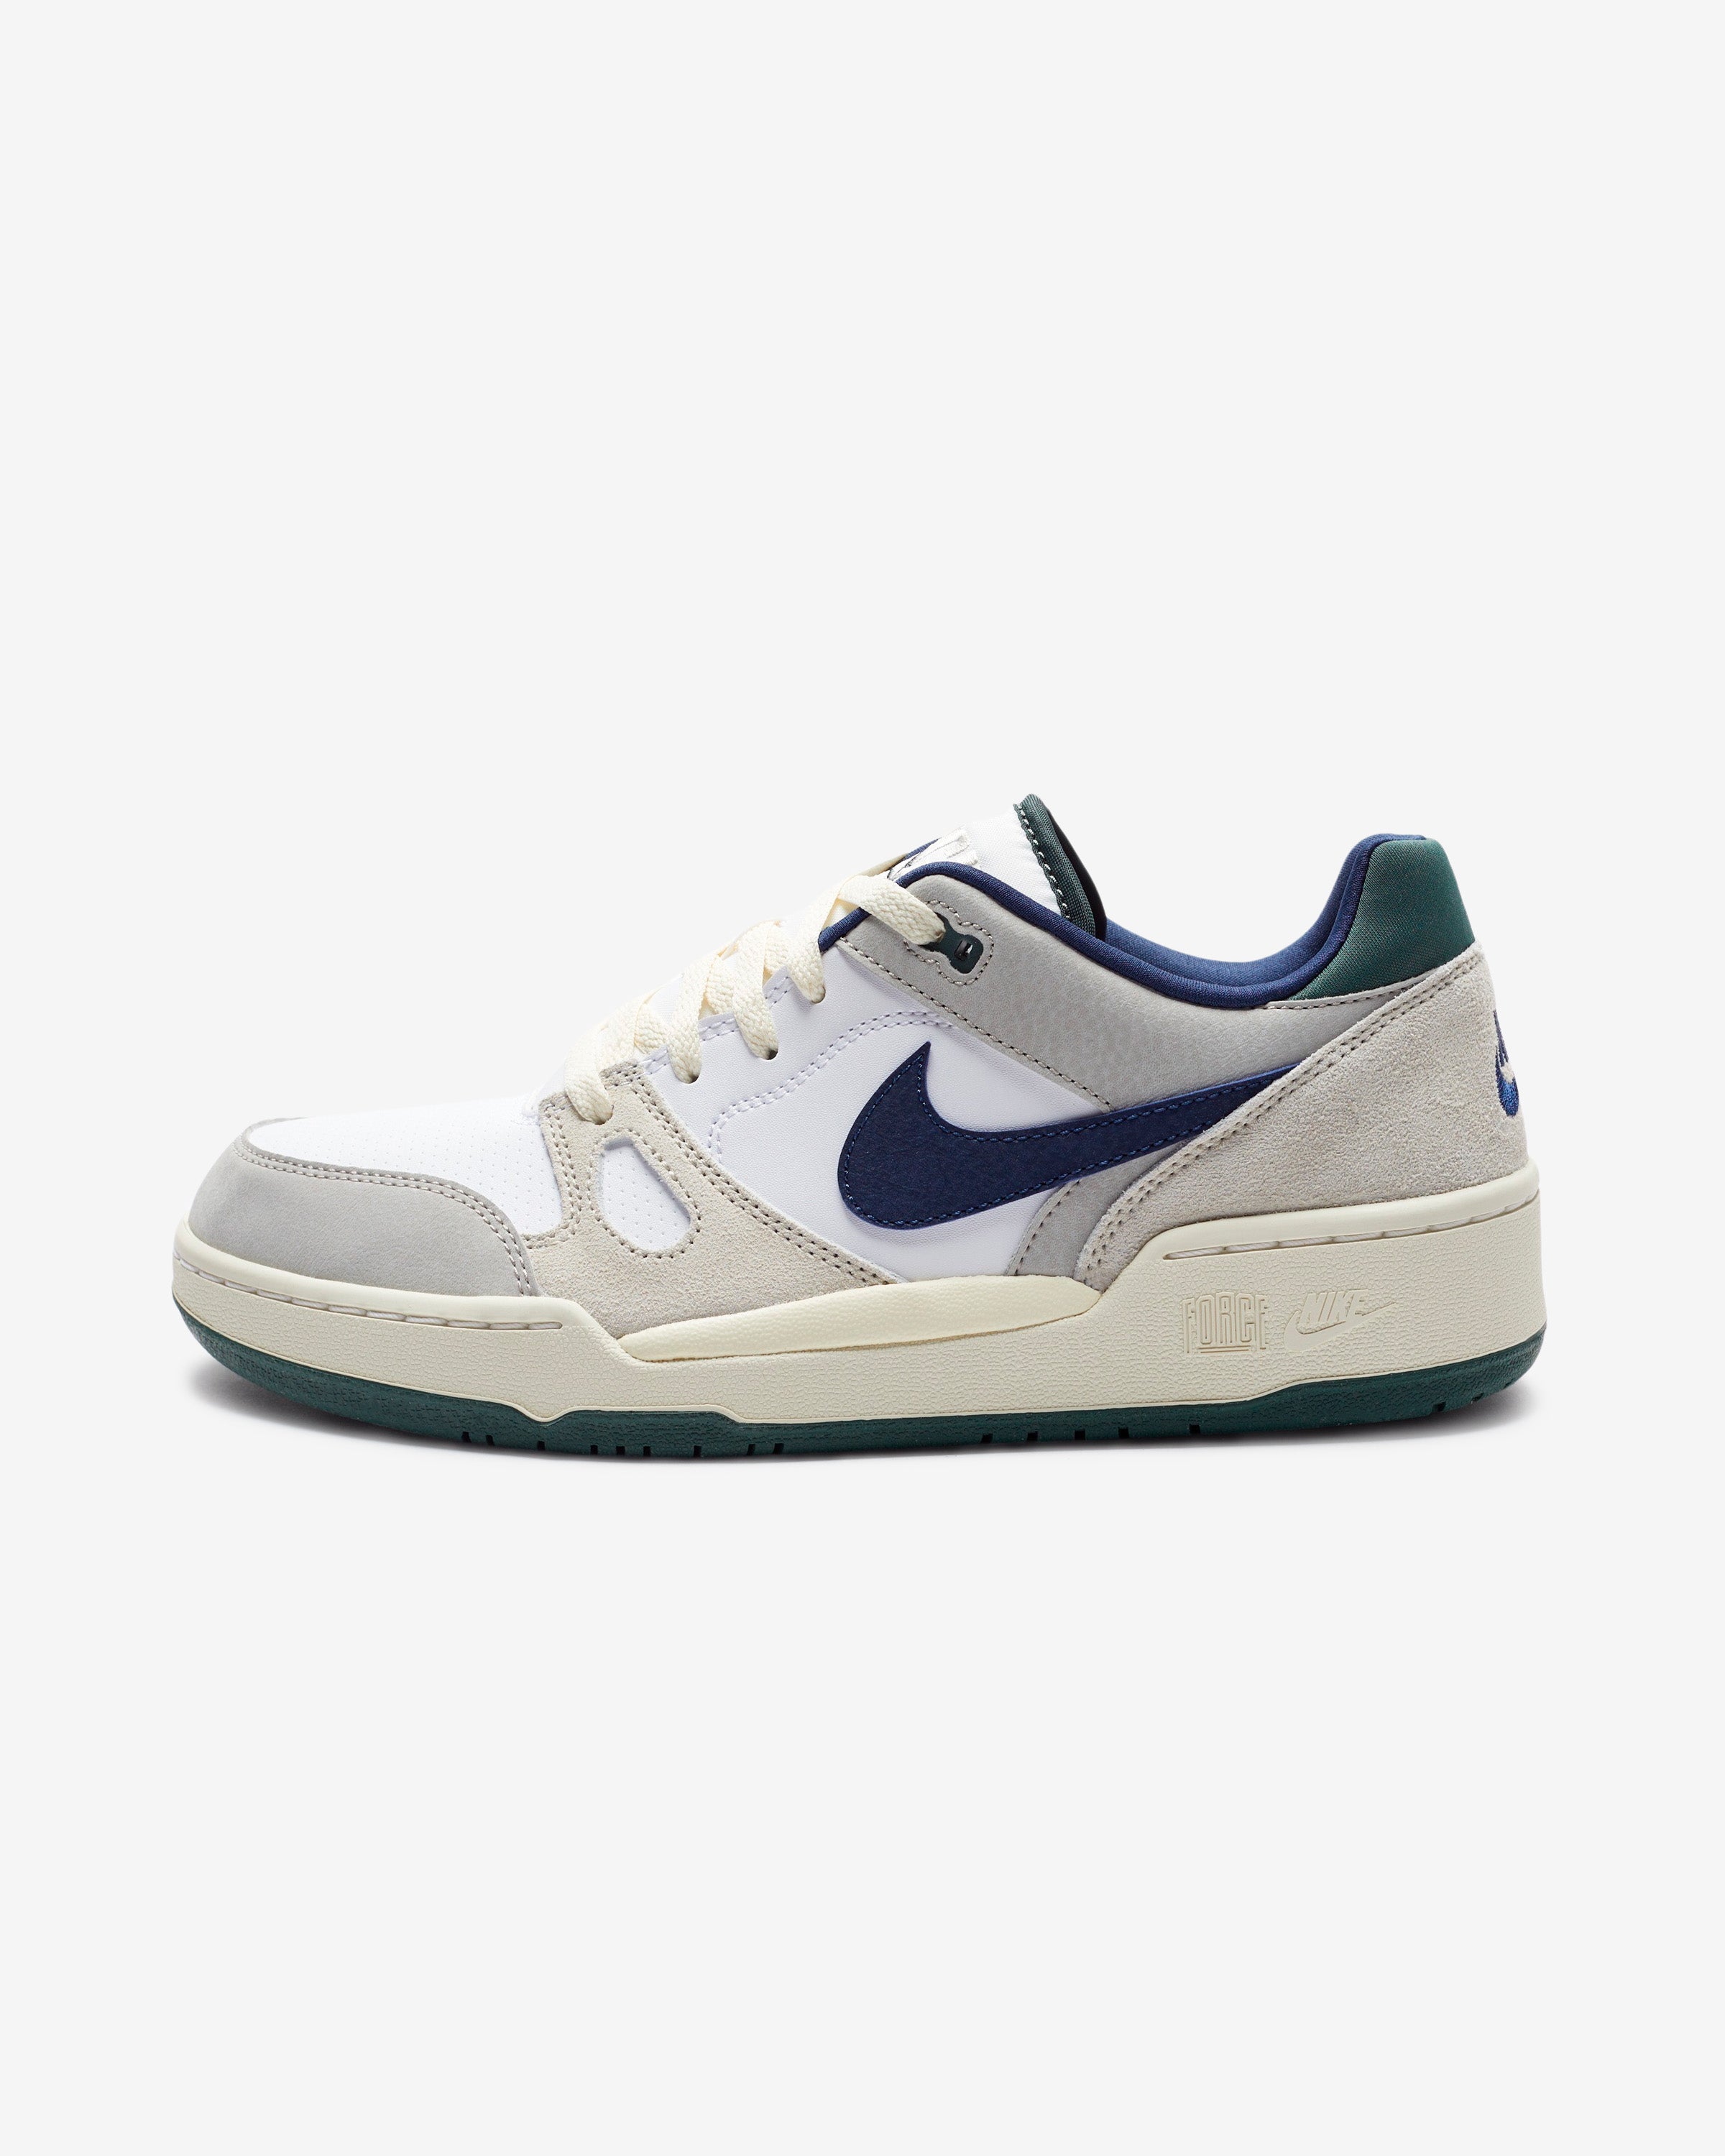 NIKE FULL FORCE LOW - WHITE/ MIDNIGHTNAVY/ LTIRONORE